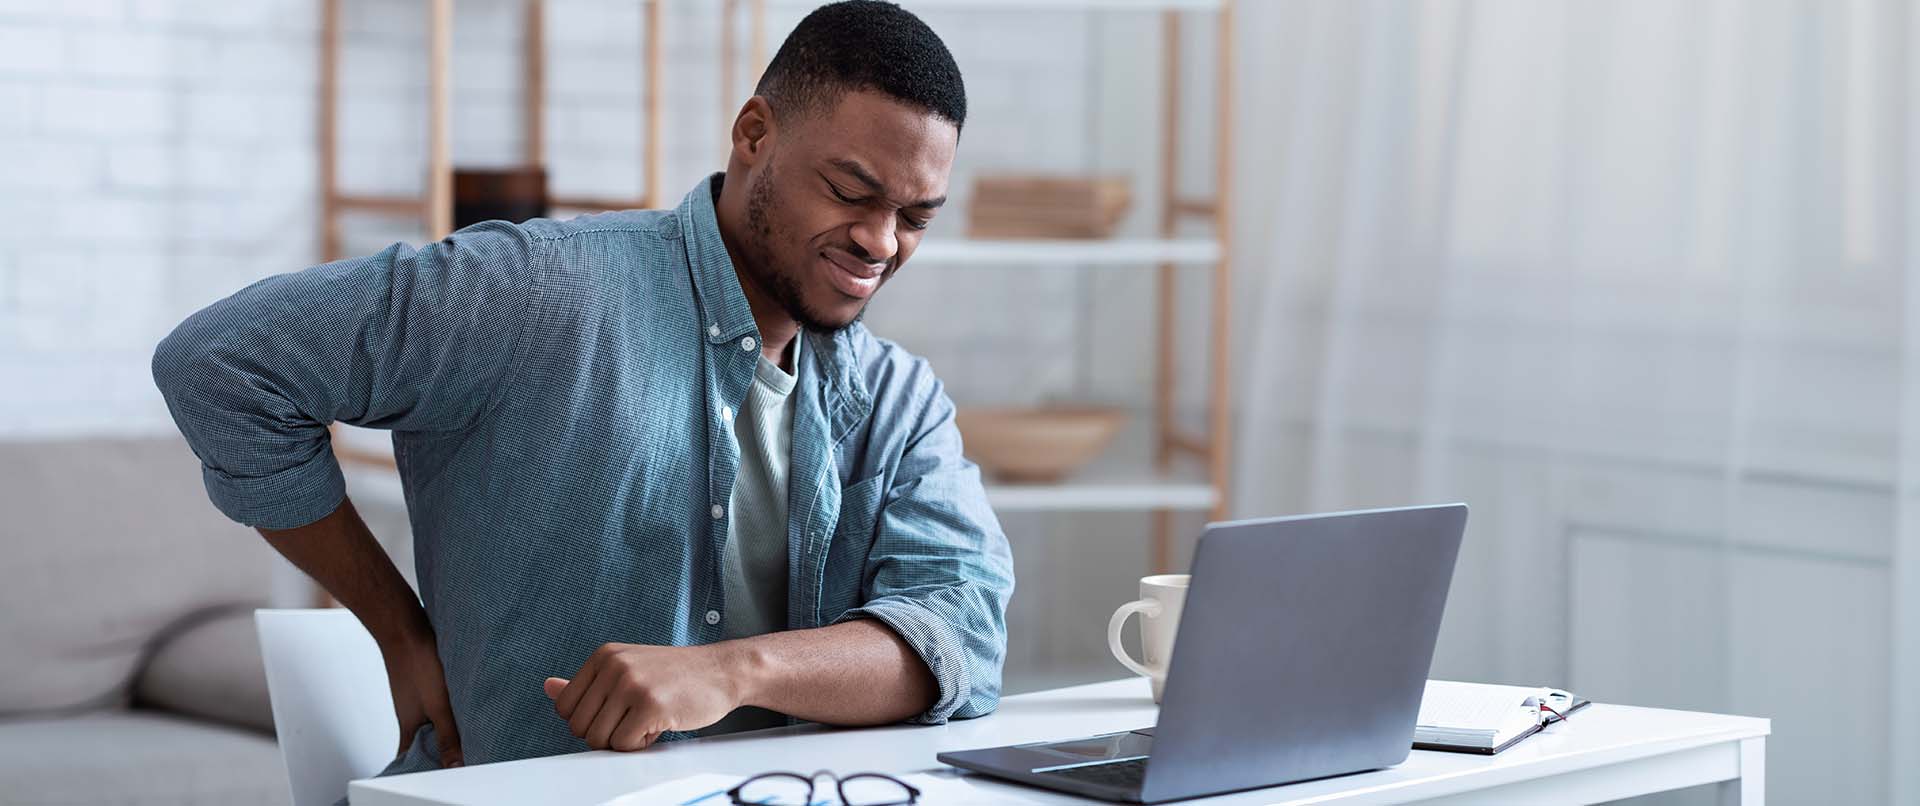 man at desk experiencing lower back pain. This represents how opioid use disorder treatment in New York, NY can help clients overcome cravings. Learn more about how opioid addiction treatment in New York, NY can help you today!